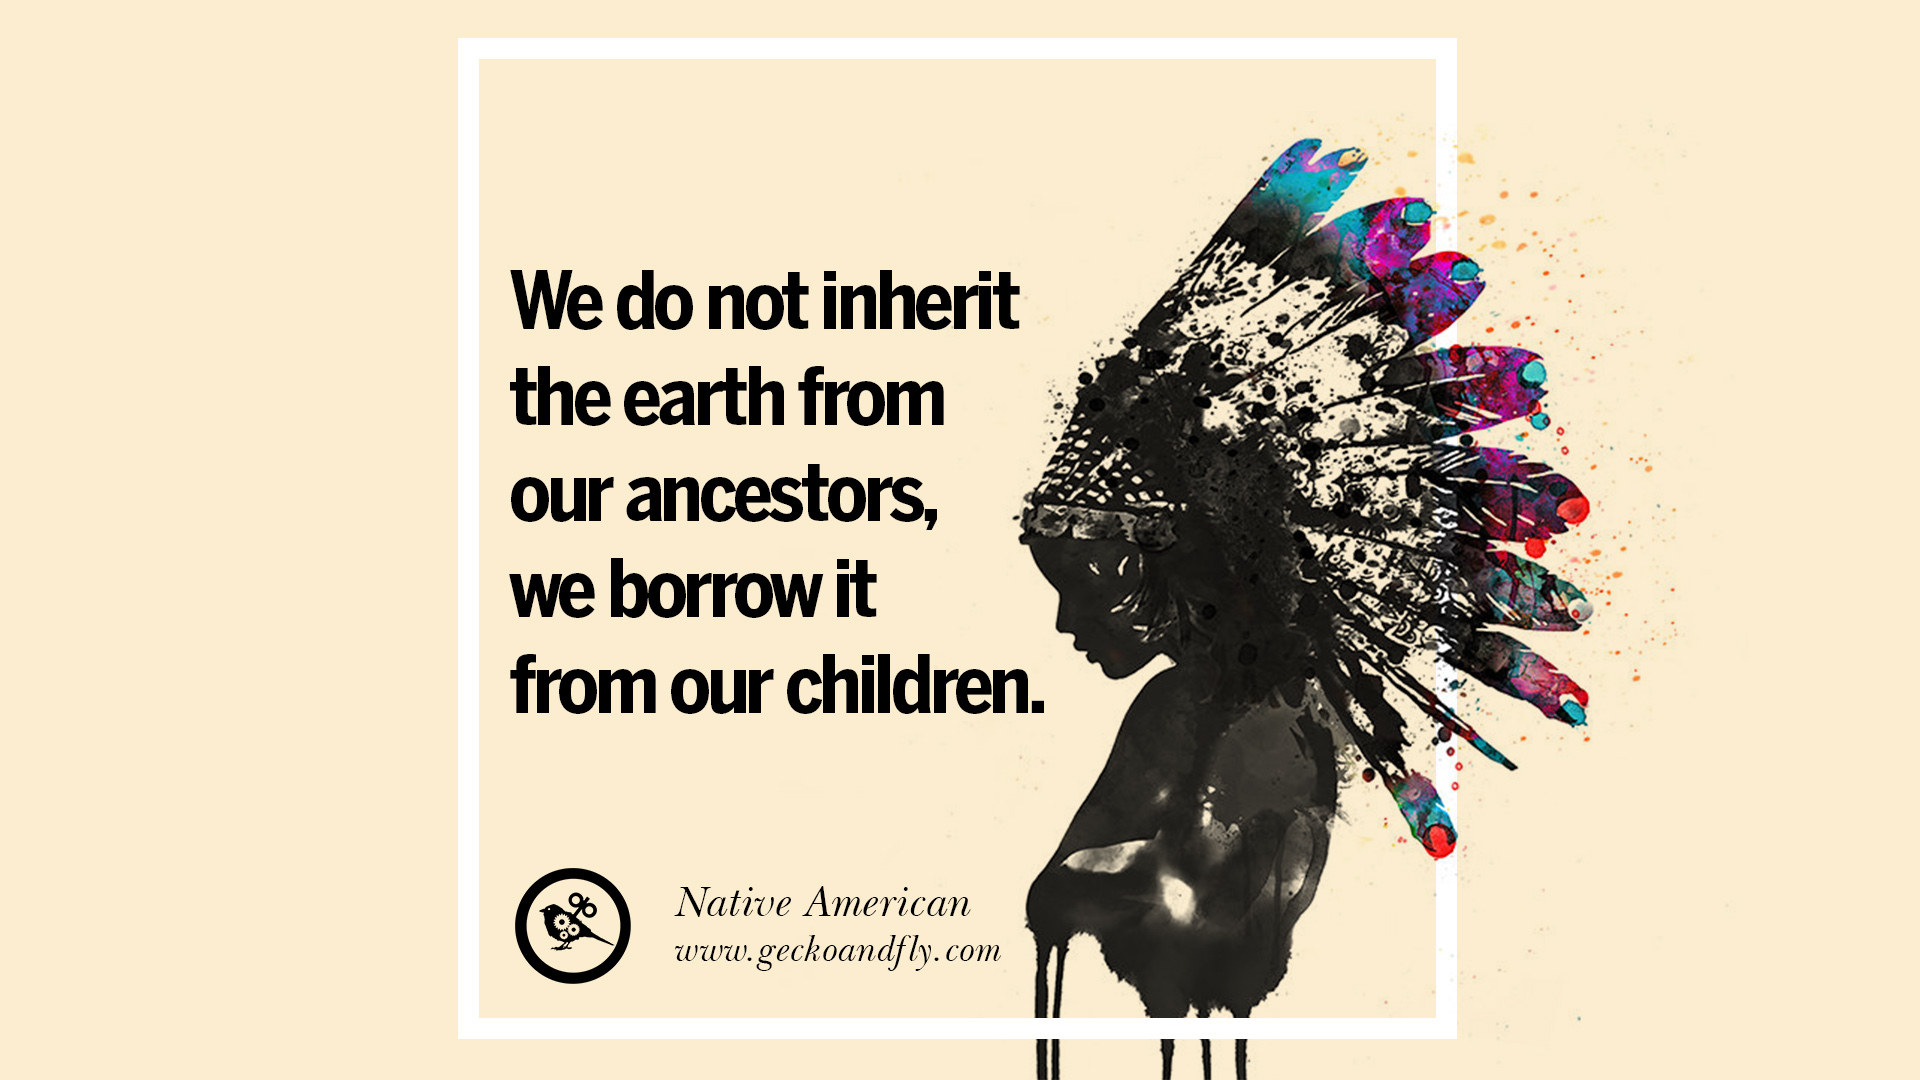 we do not inherit the earth from our ancestors, we borrow it from our children.